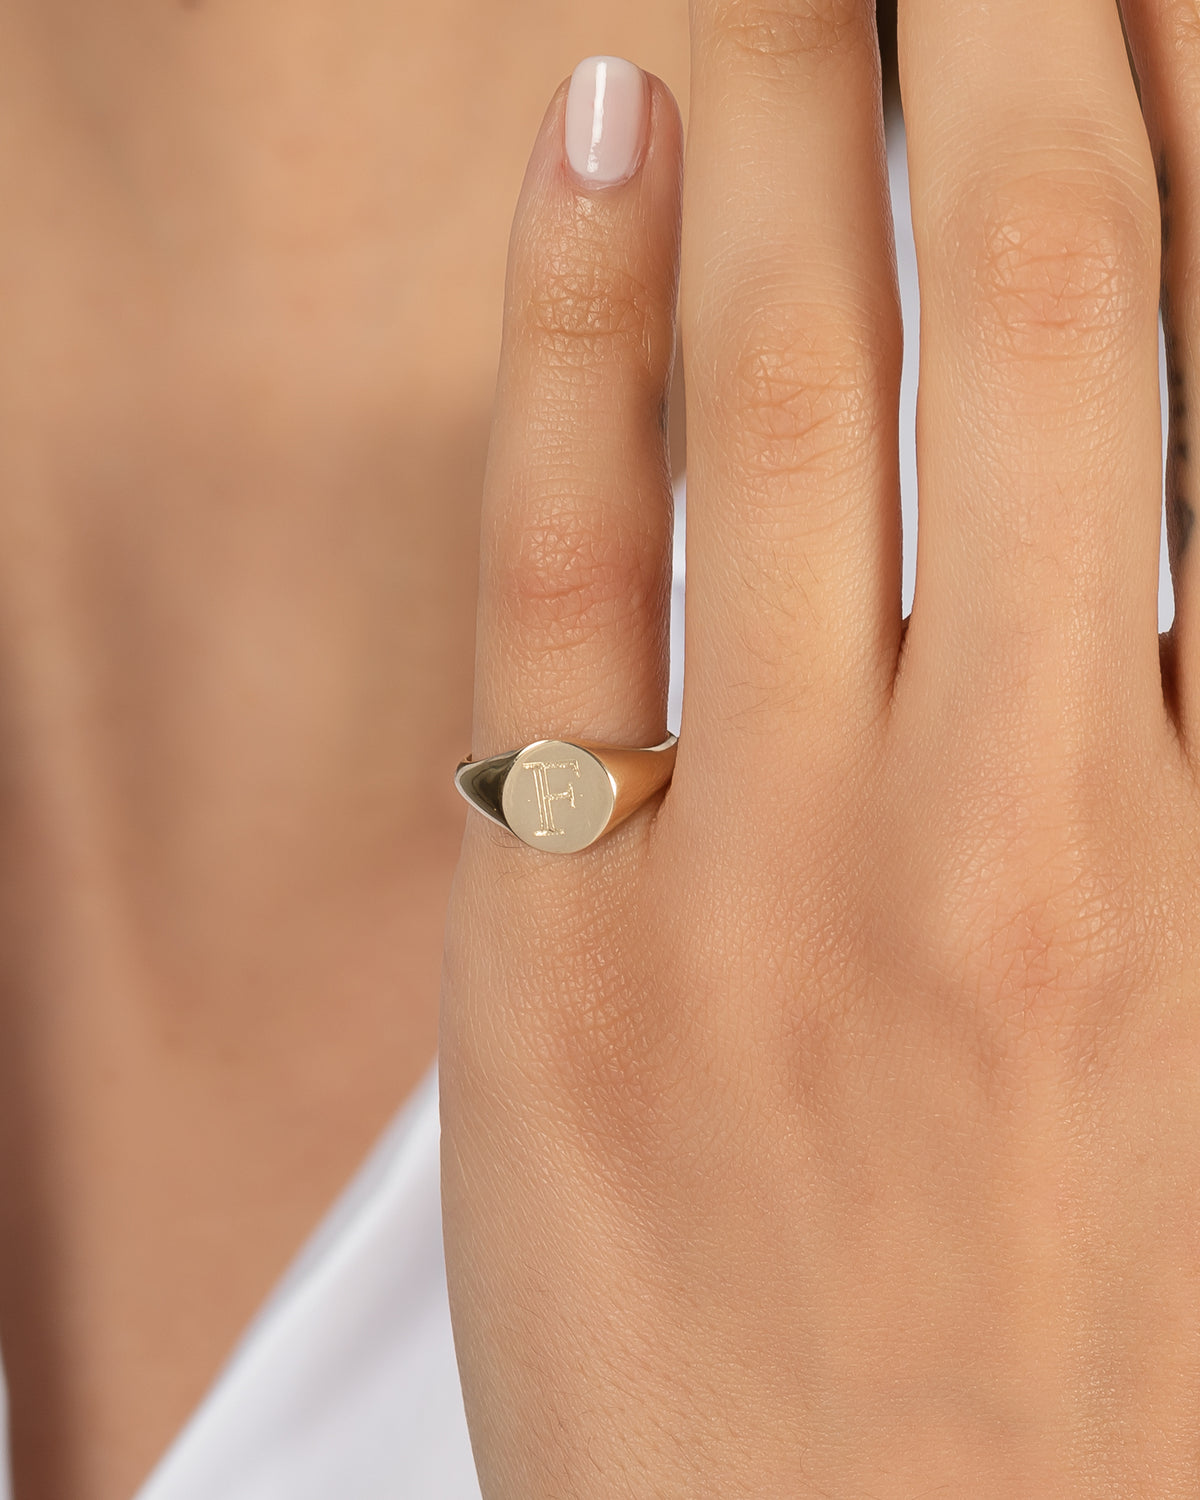 Small Signet Ring